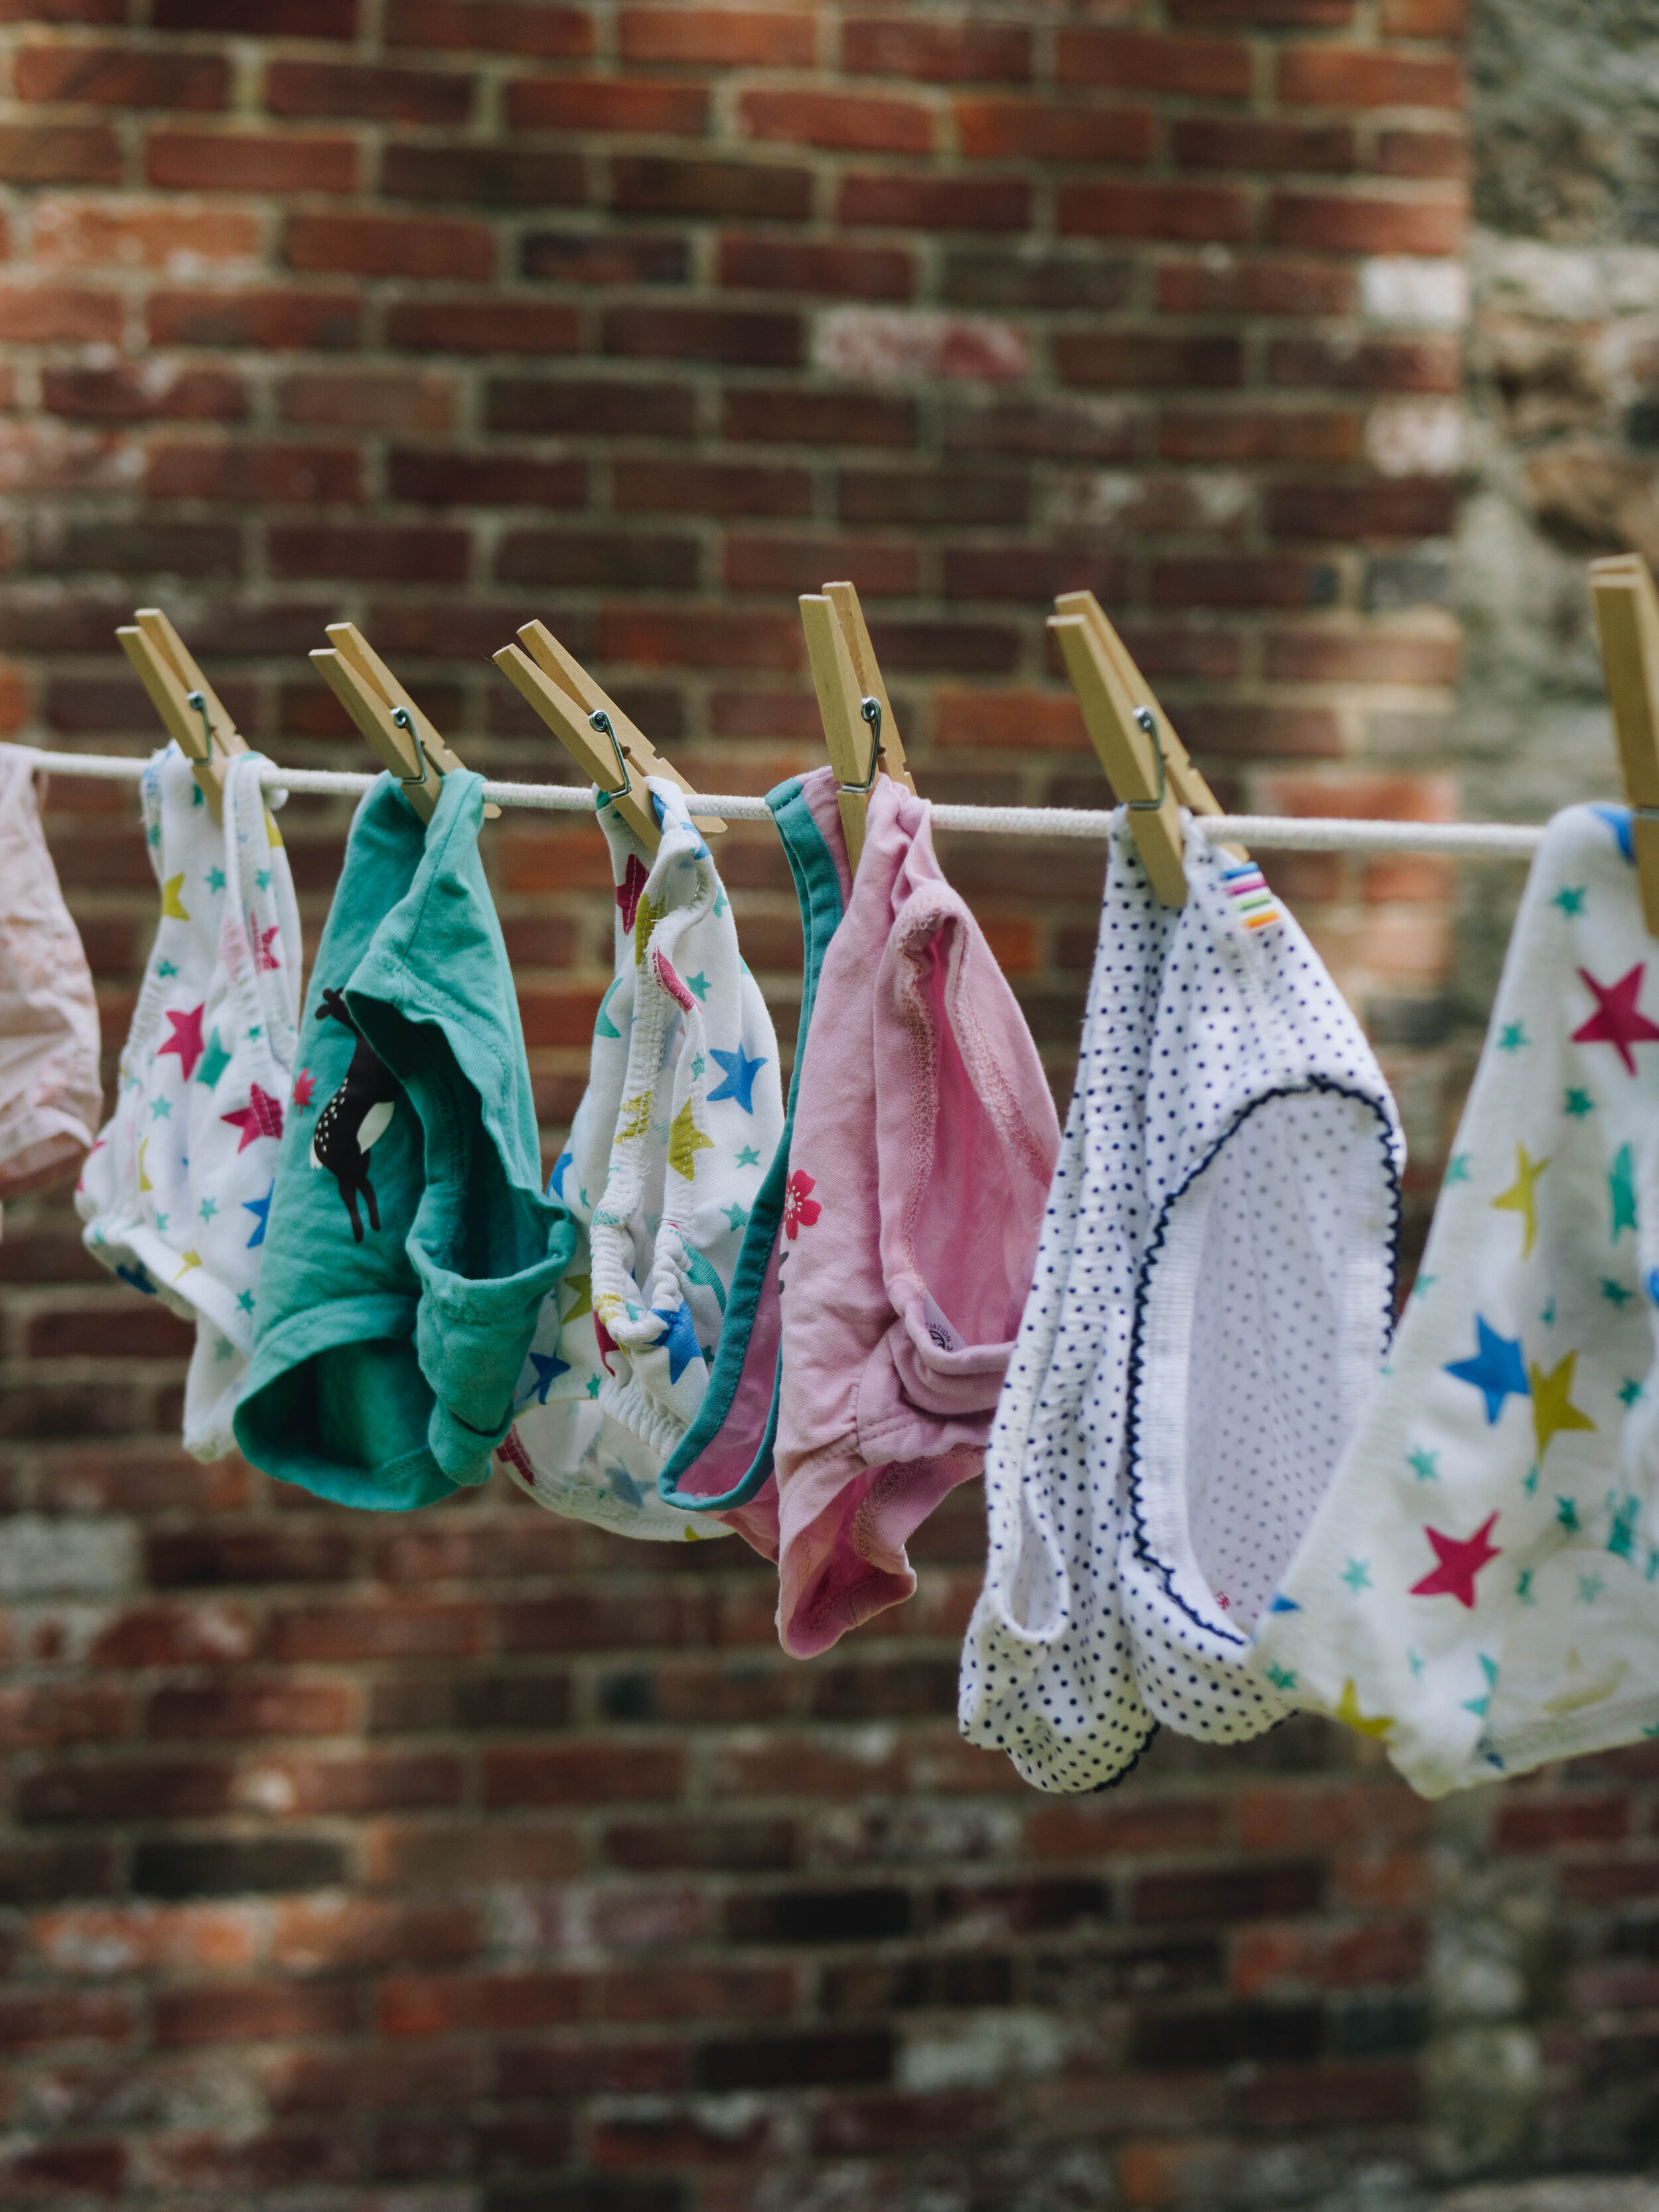 How we potty trained + ethical kids underwear — our slow home